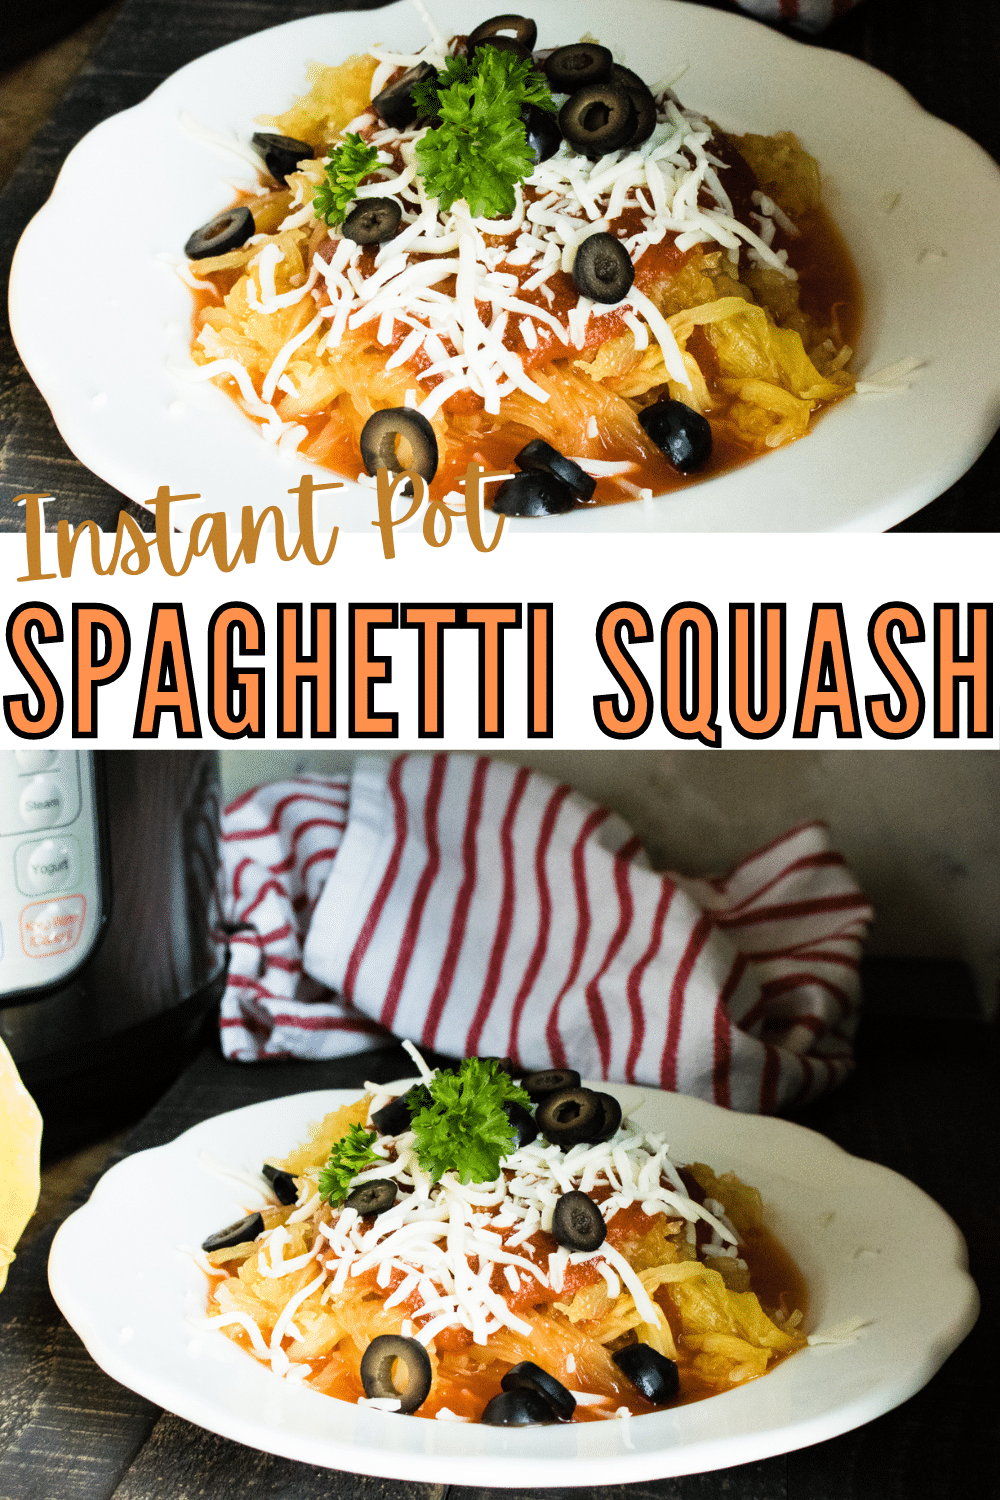 tip image is a closeup of spaghetti squash on a white plate, bottom image is Instant Pot Spaghetti Squash on a plate topped with black olives, parsley and cheese with an instant pot and half of a spaghetti squash blurred in the background with title text reading Instant Pot Spaghetti Squash